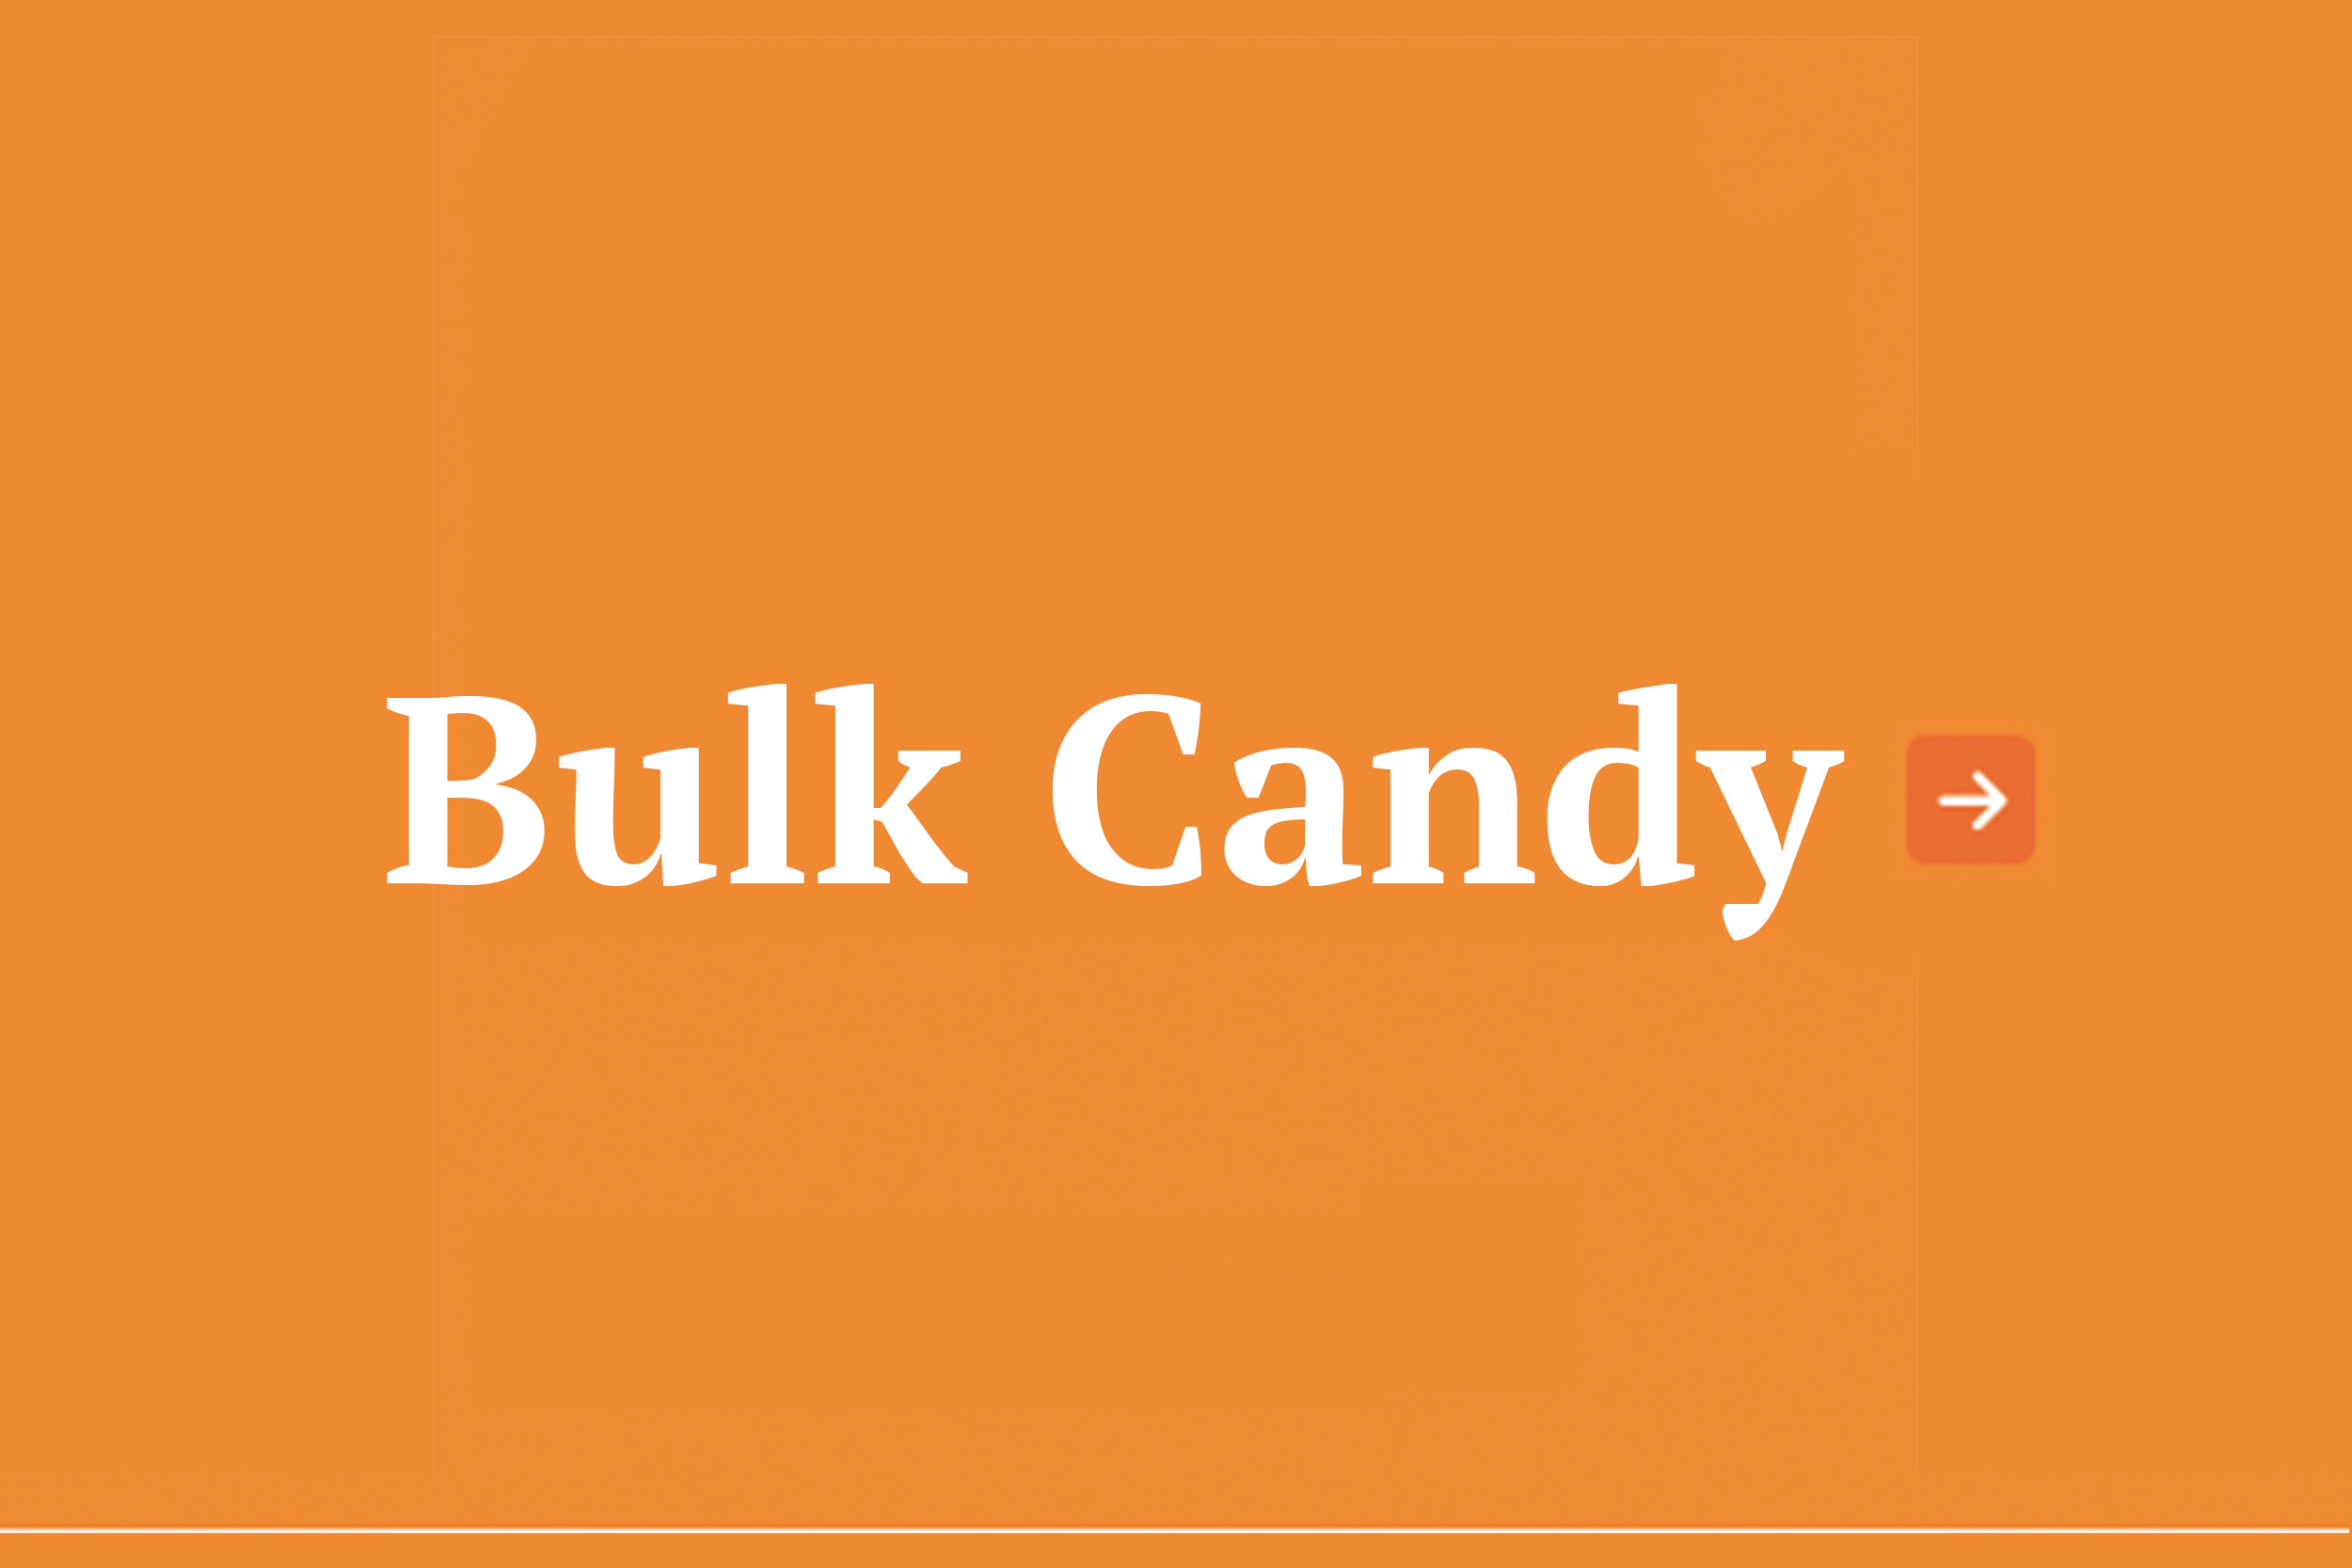 dearborn-wholesale-grocers-chicago-where-to-get-cheap-groceries-60624-bulk-candy.jpg